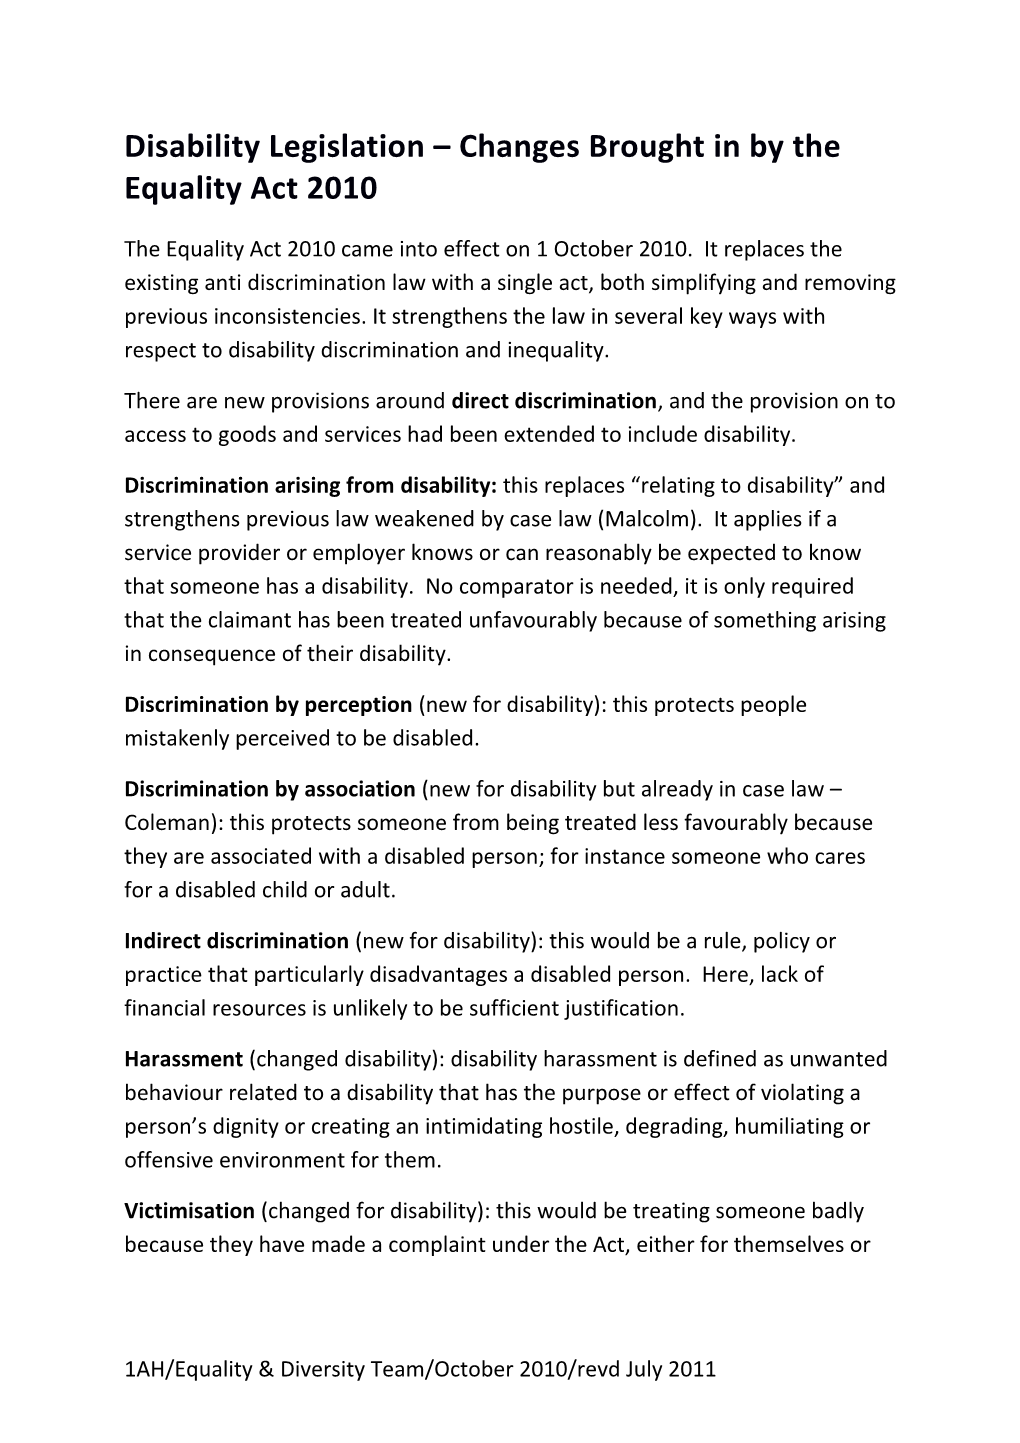 Disability Legislation Changes Brought in by the Equality Act 2010